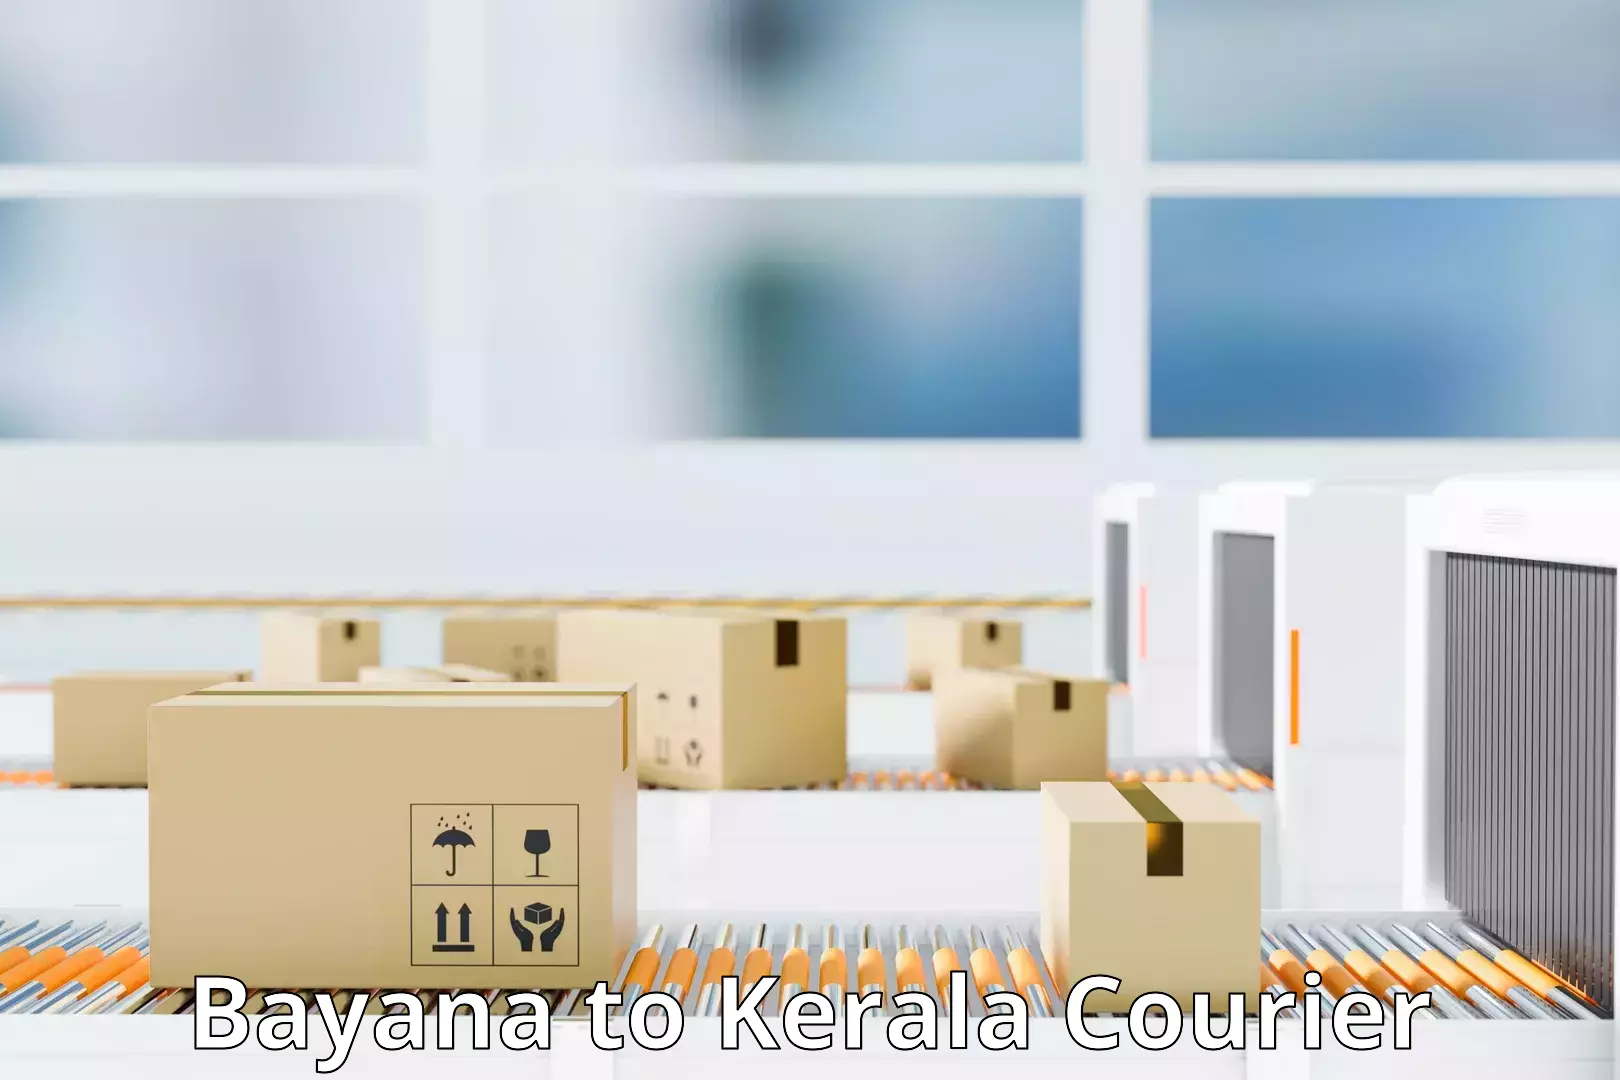 24-hour courier services Bayana to Kerala